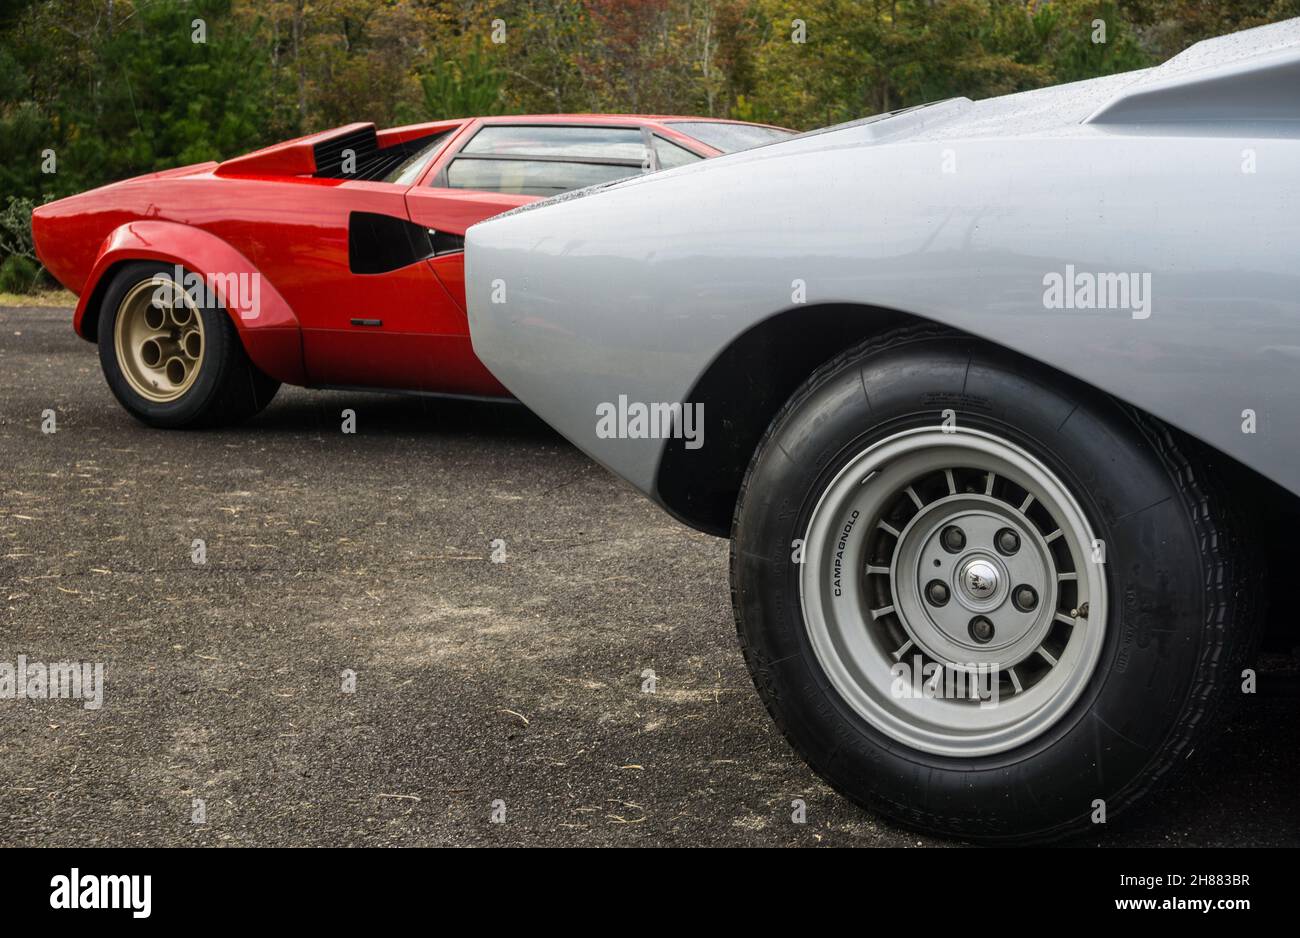 Two Lamborghini Countach sports cars. Silver LP400 and red LP400S classic supercar Stock Photo